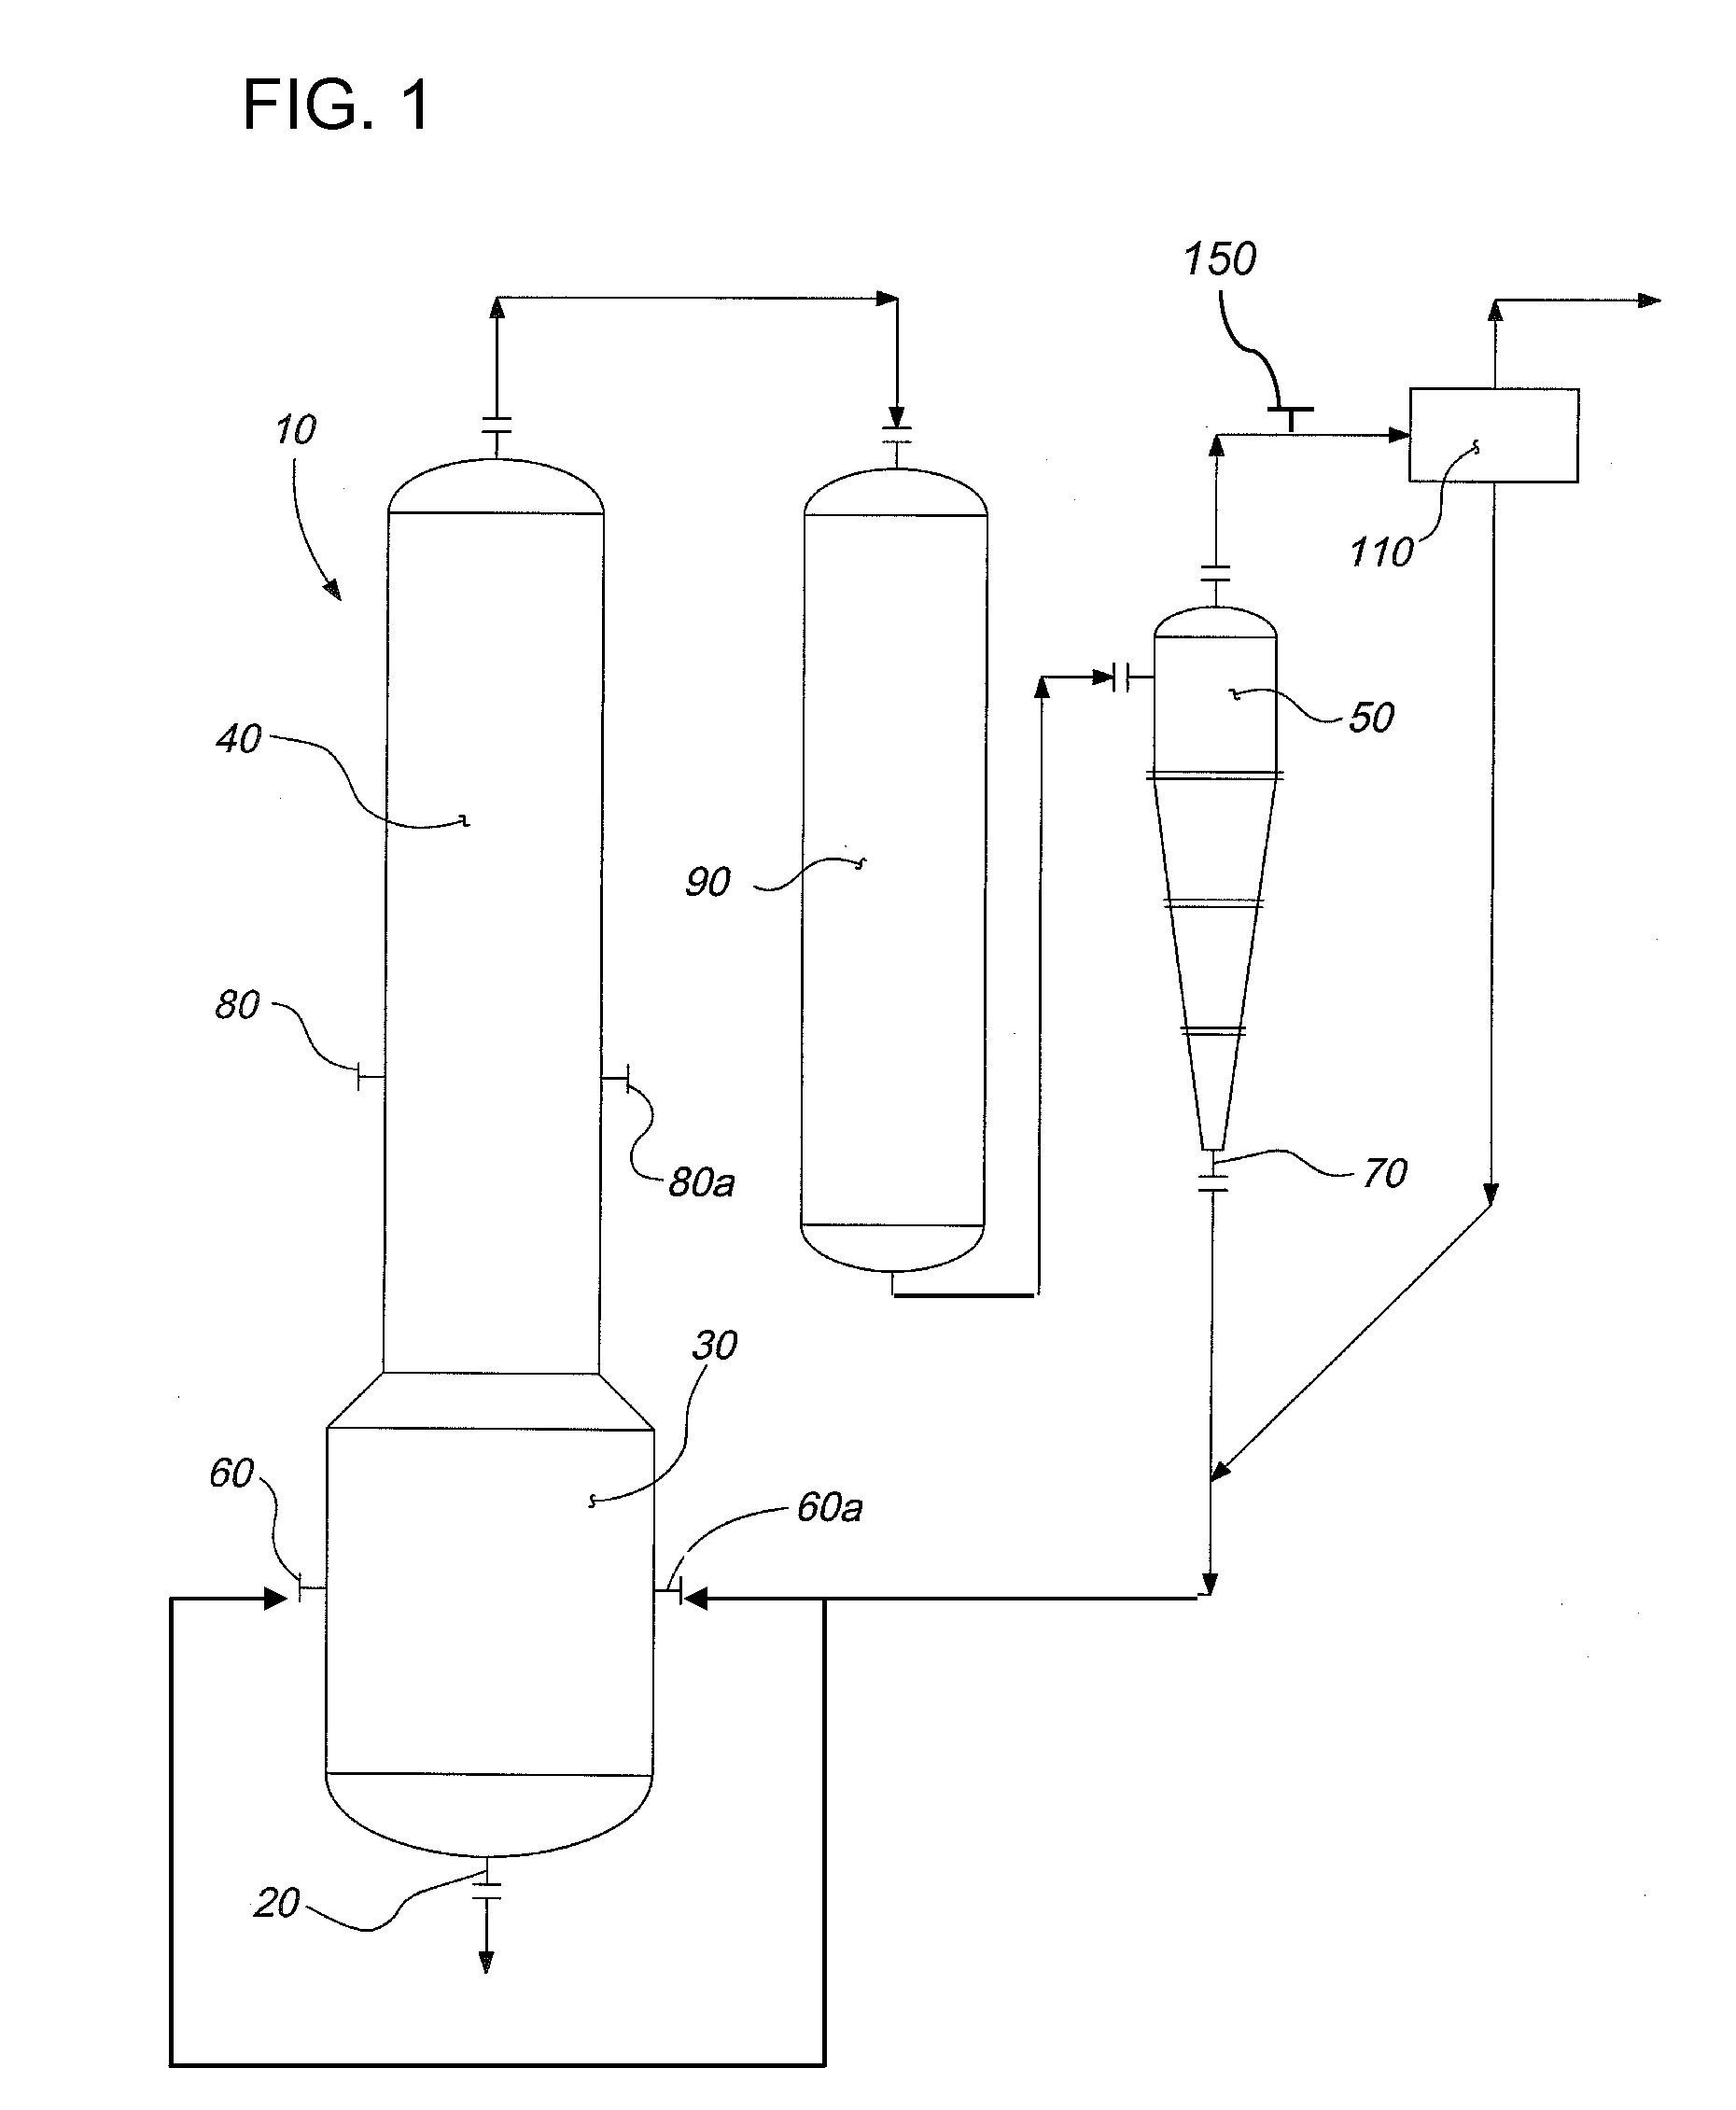 Flux addition as a filter conditioner